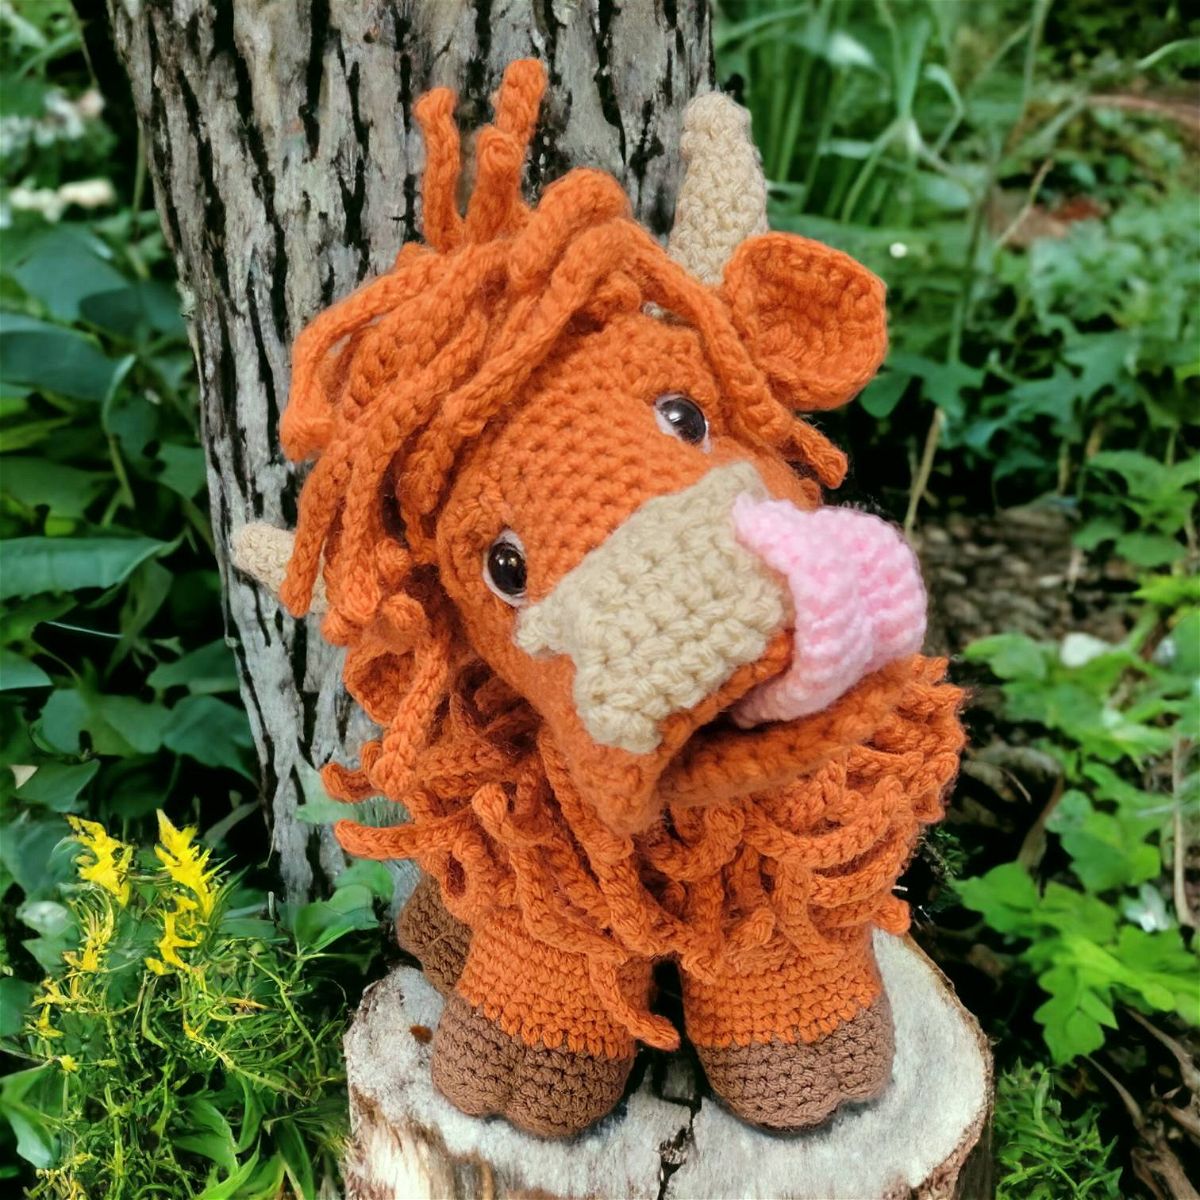 Scottish Cow Crochet Pattern Review by Deanna Palendat for Cottontail Whiskers